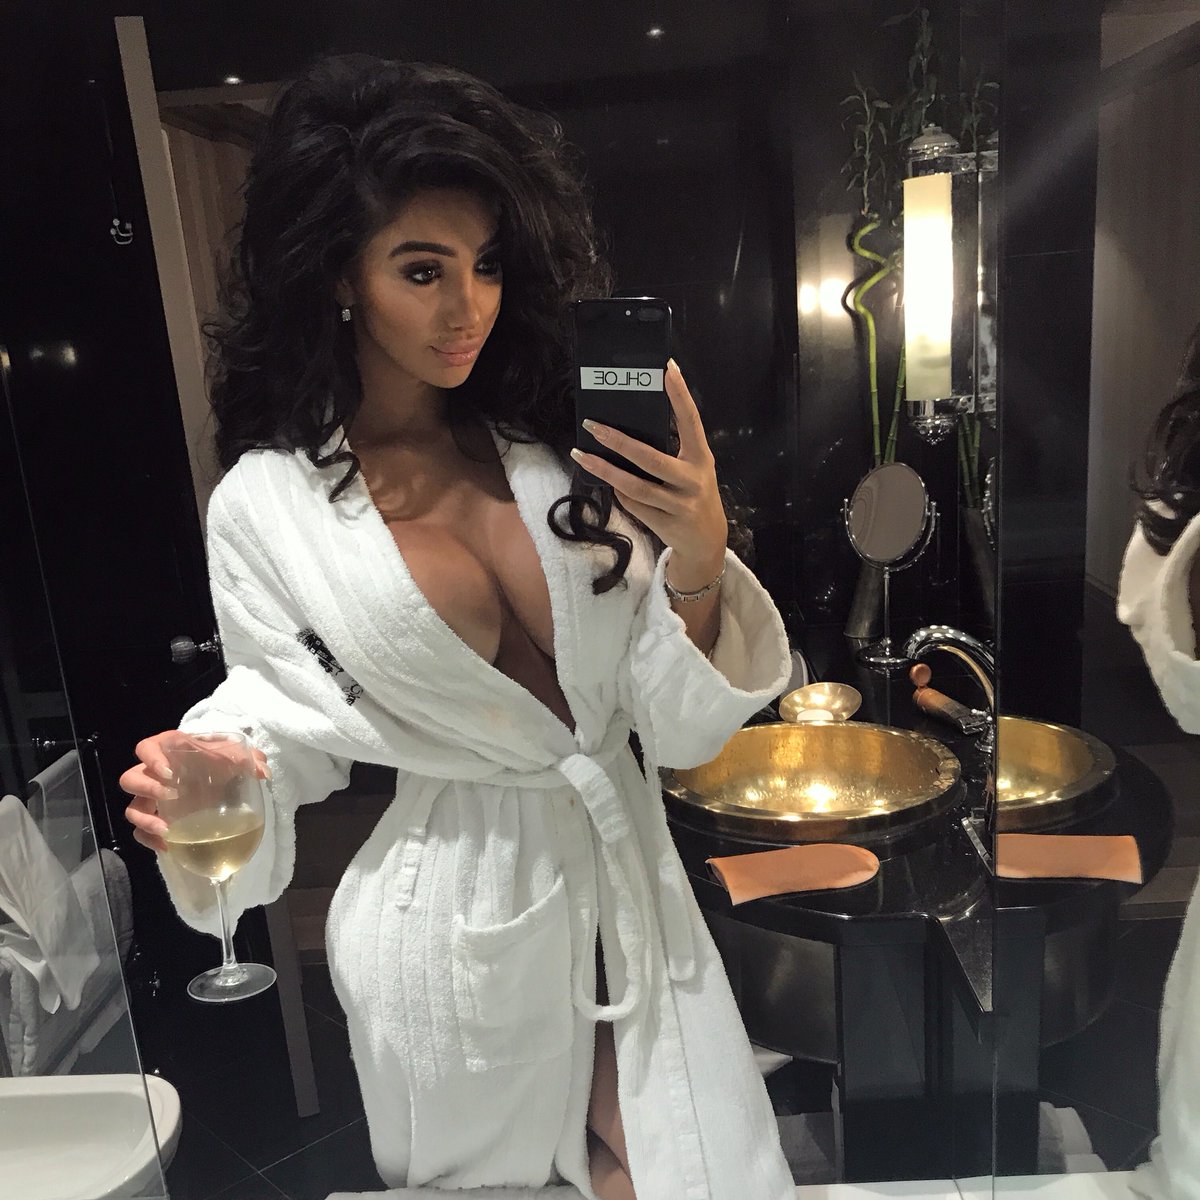 Chloe Khan,chloekhanxxx, photos, images, pictures, twitter, real life, star...